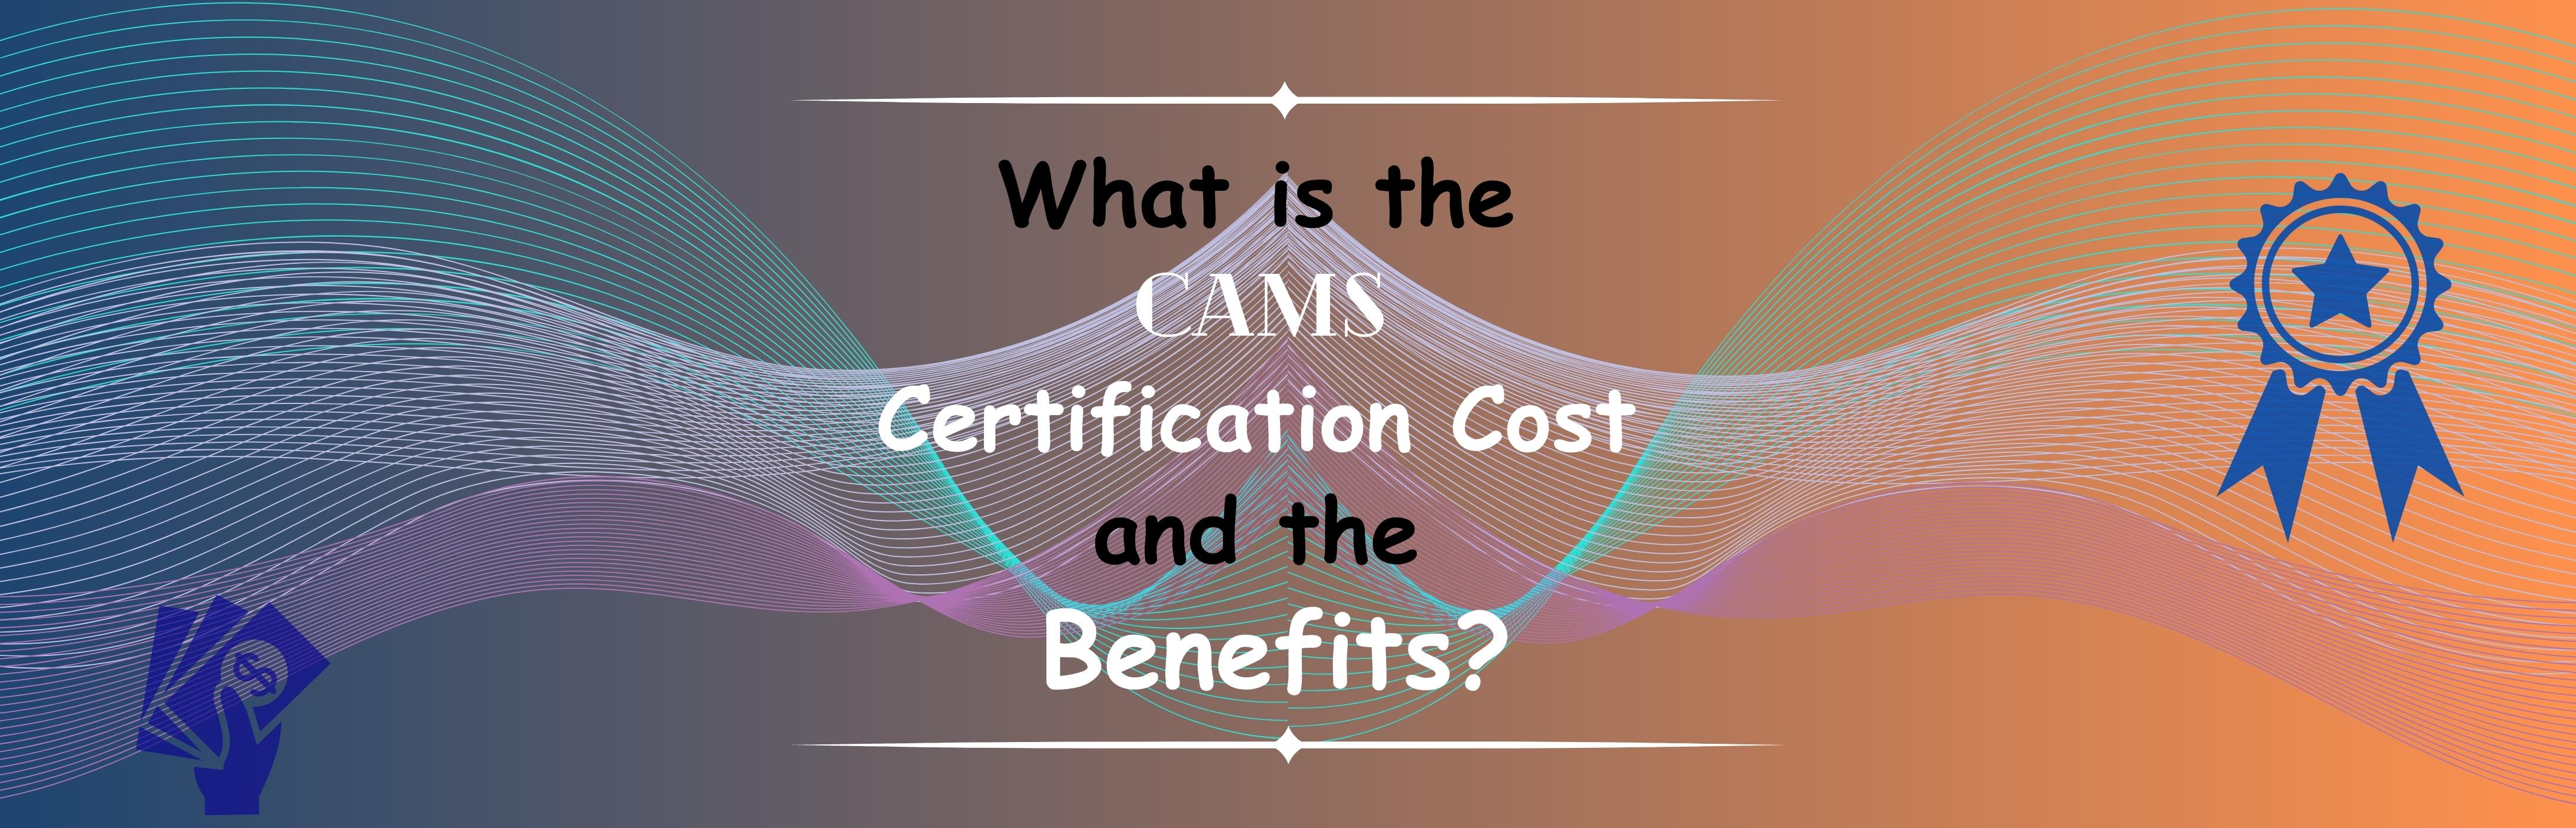 What is the CAMS Certification Cost and the Benefits?